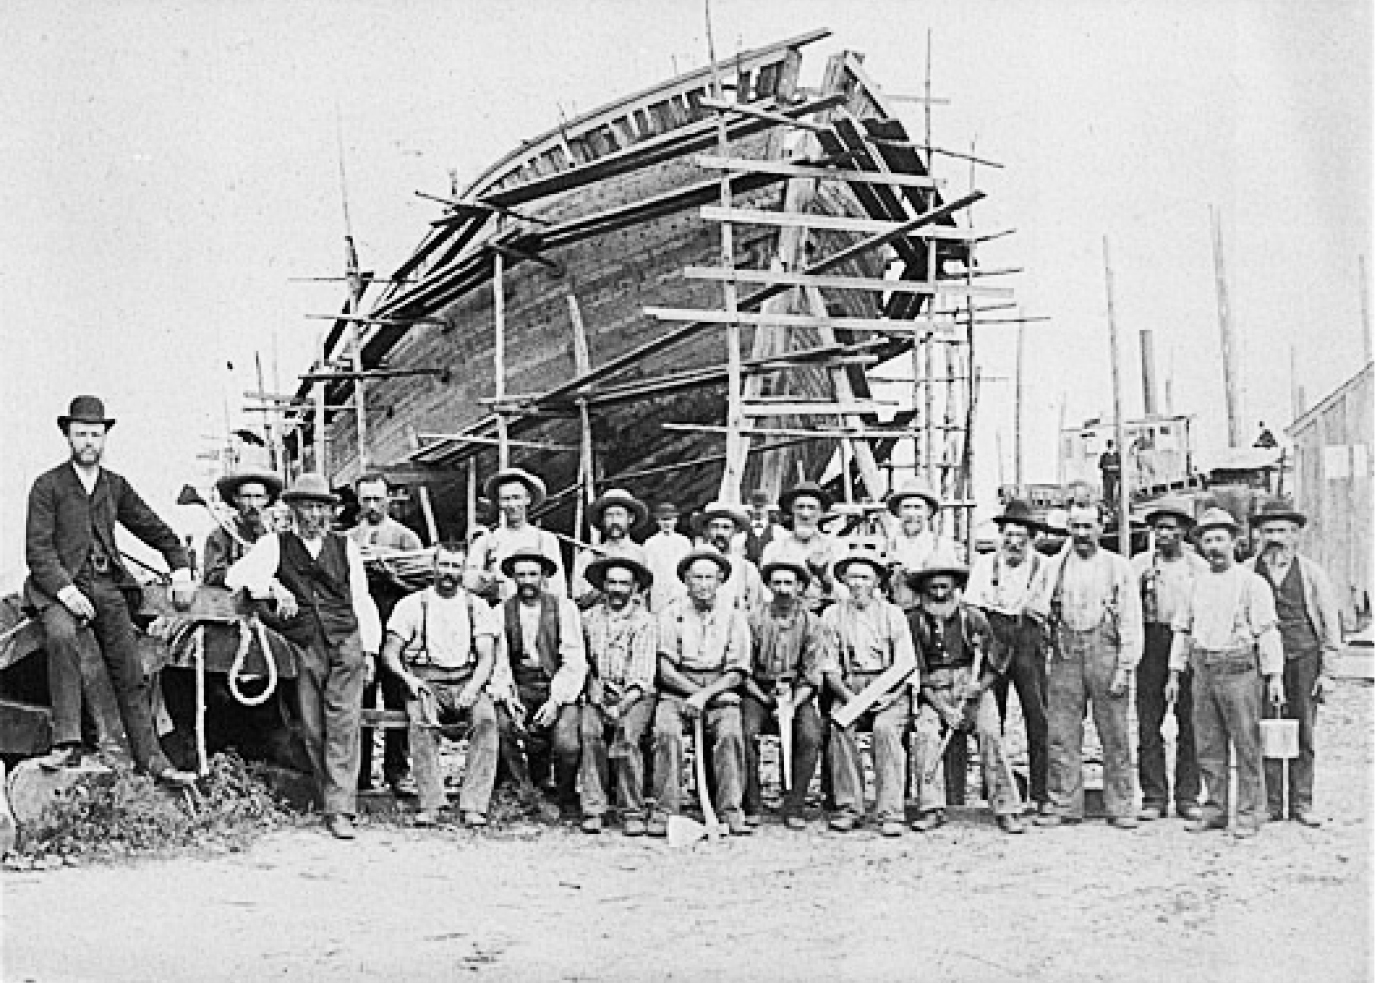 Shipyard History Photo: FACTS ON OUR HISTORY